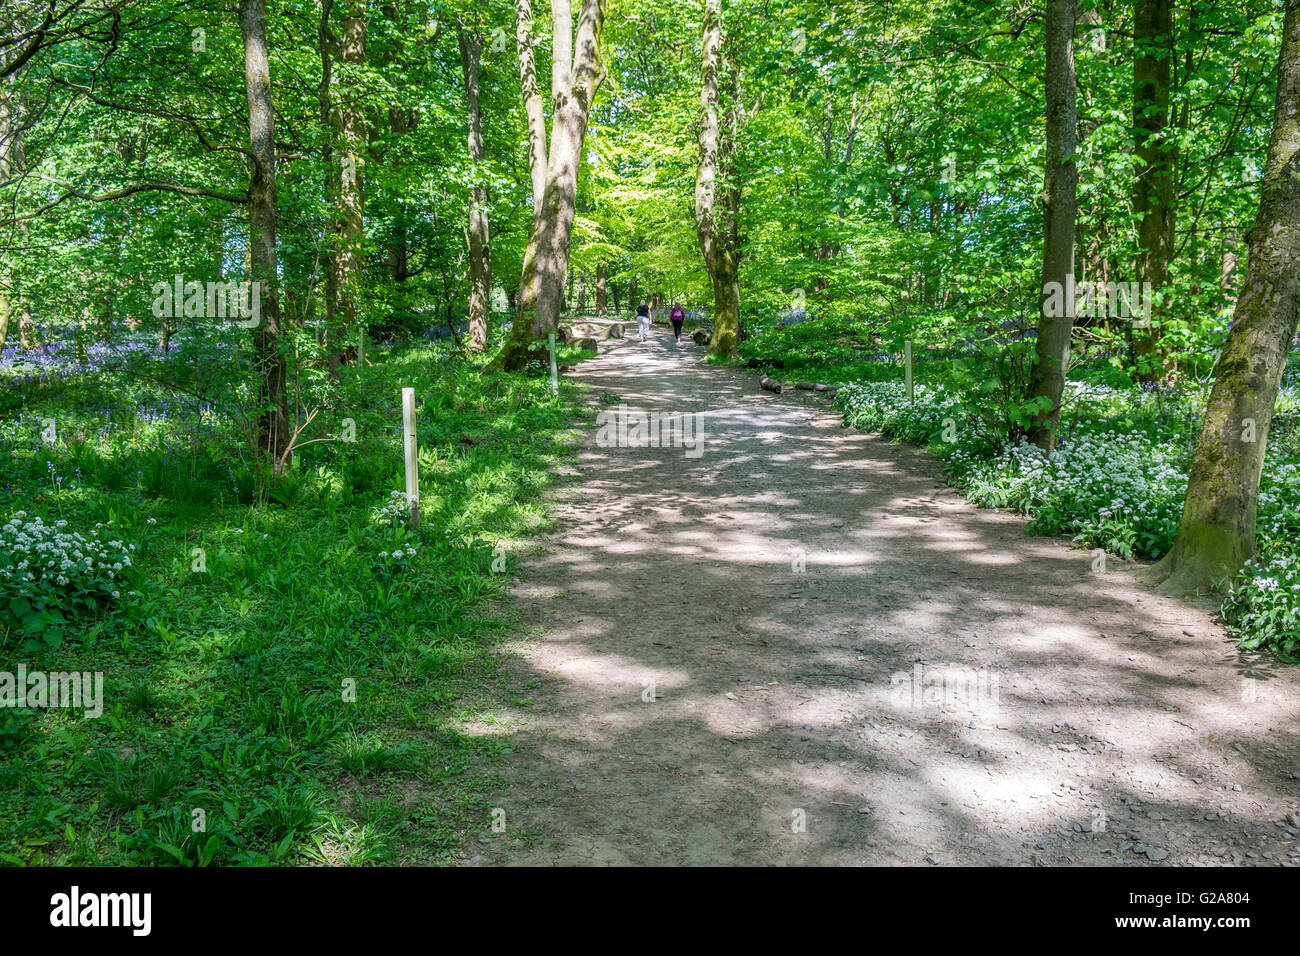 Blue Bell Wood in full bloom with Wild garlic flowers Stock Photo